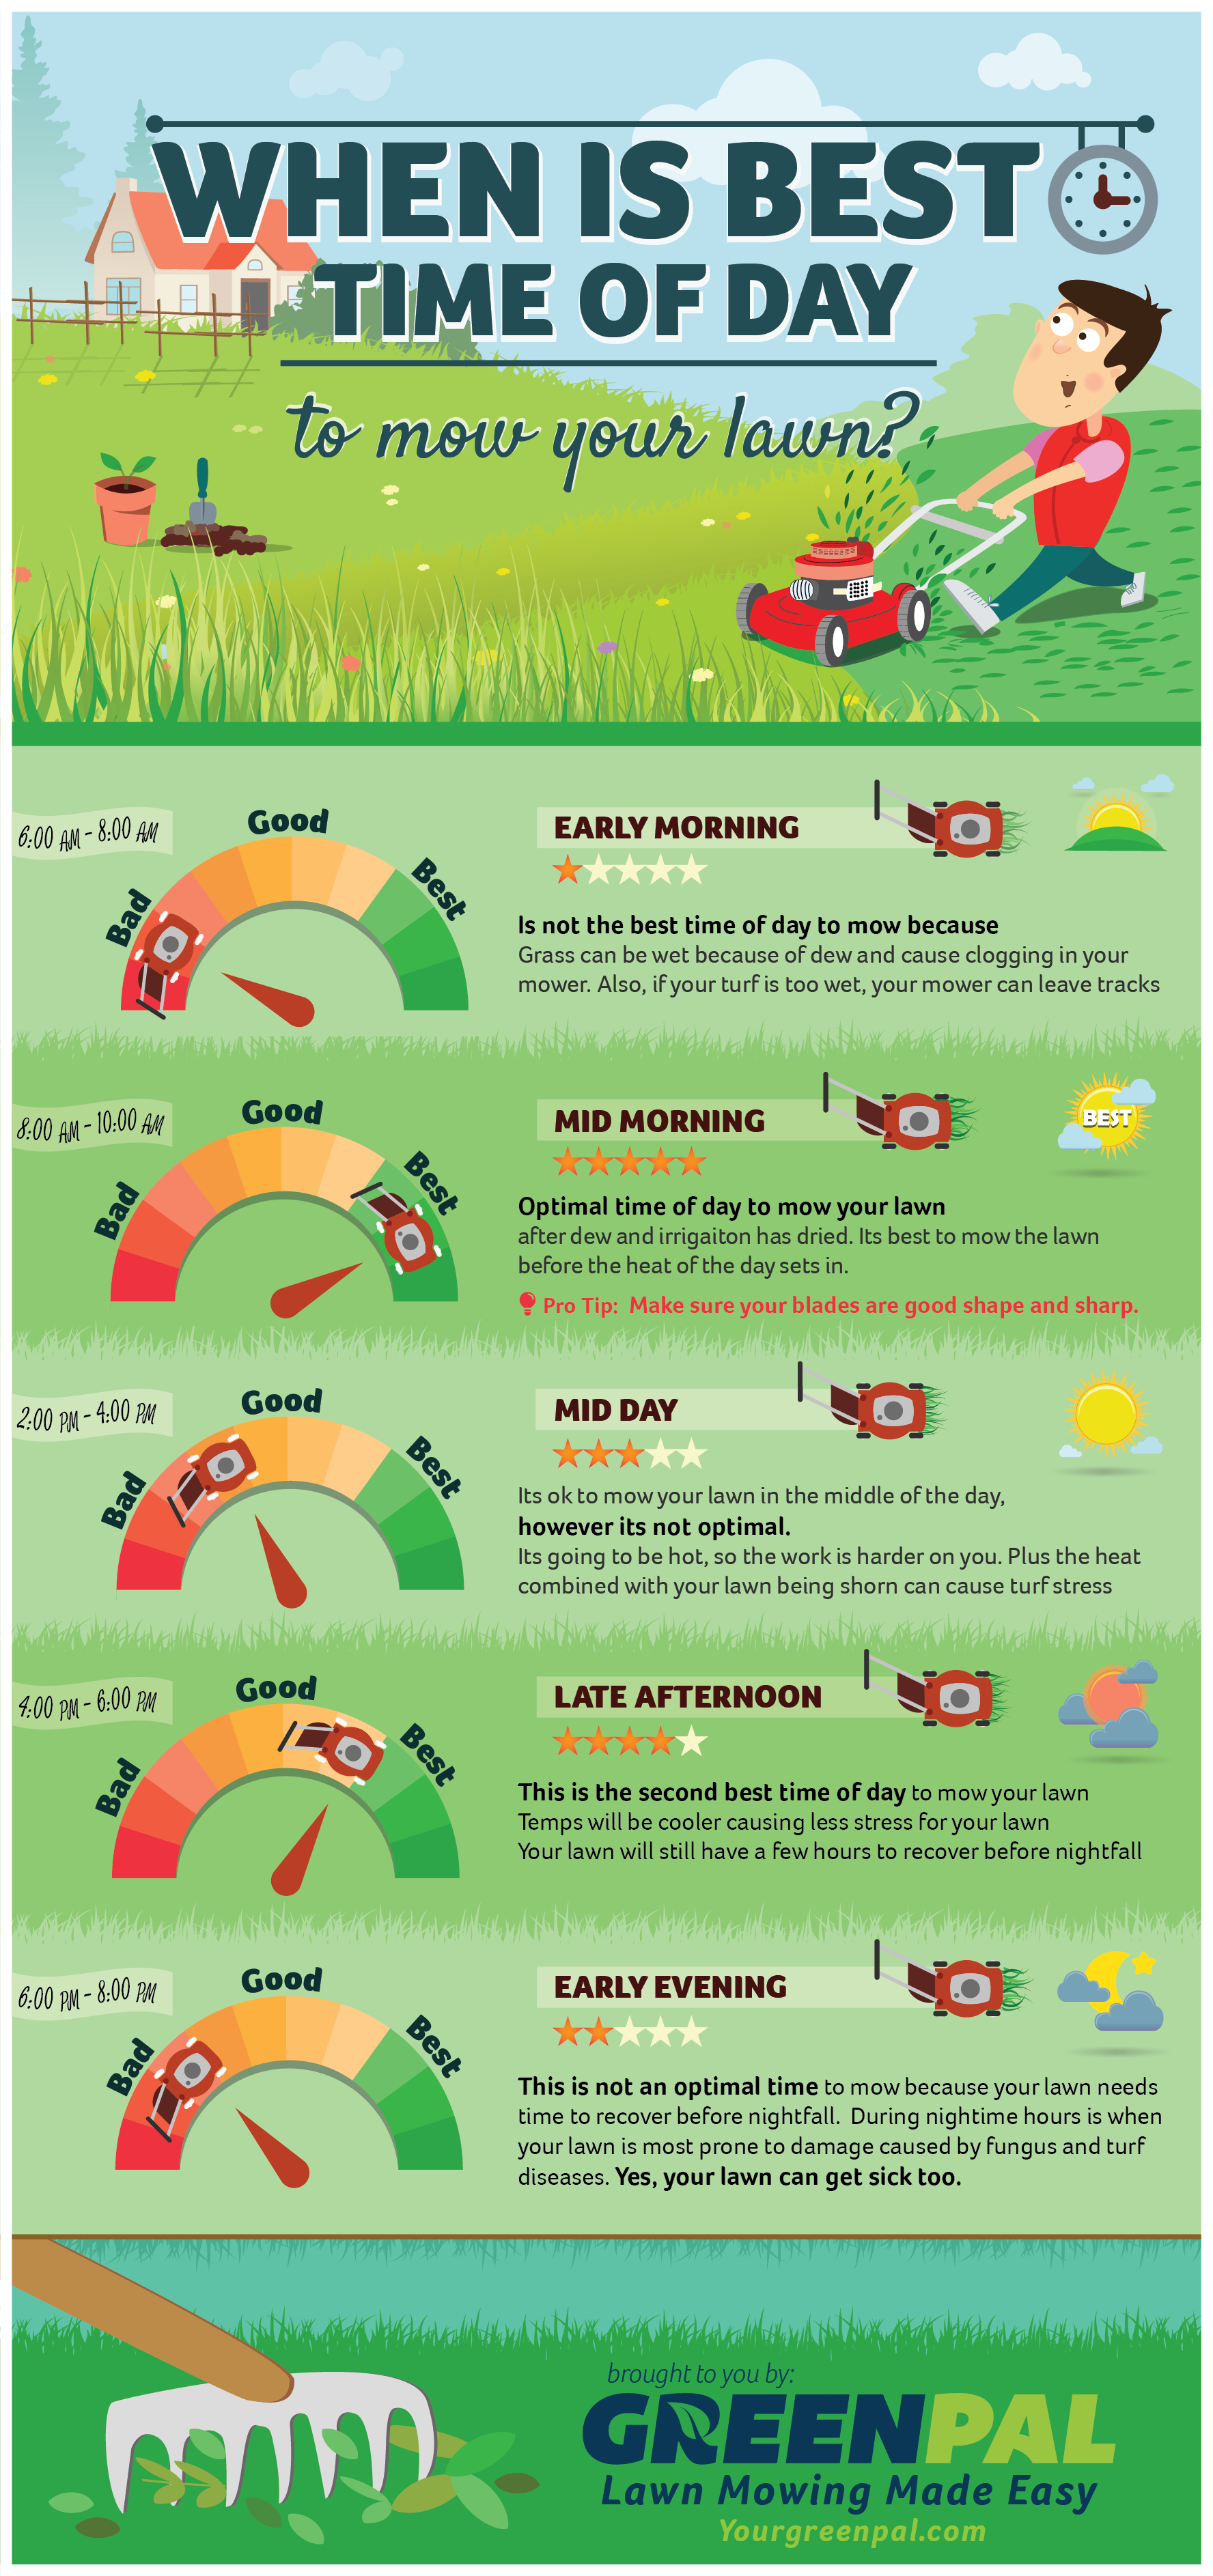 When Is Best Time of Day to Mow Your Lawn? infographic